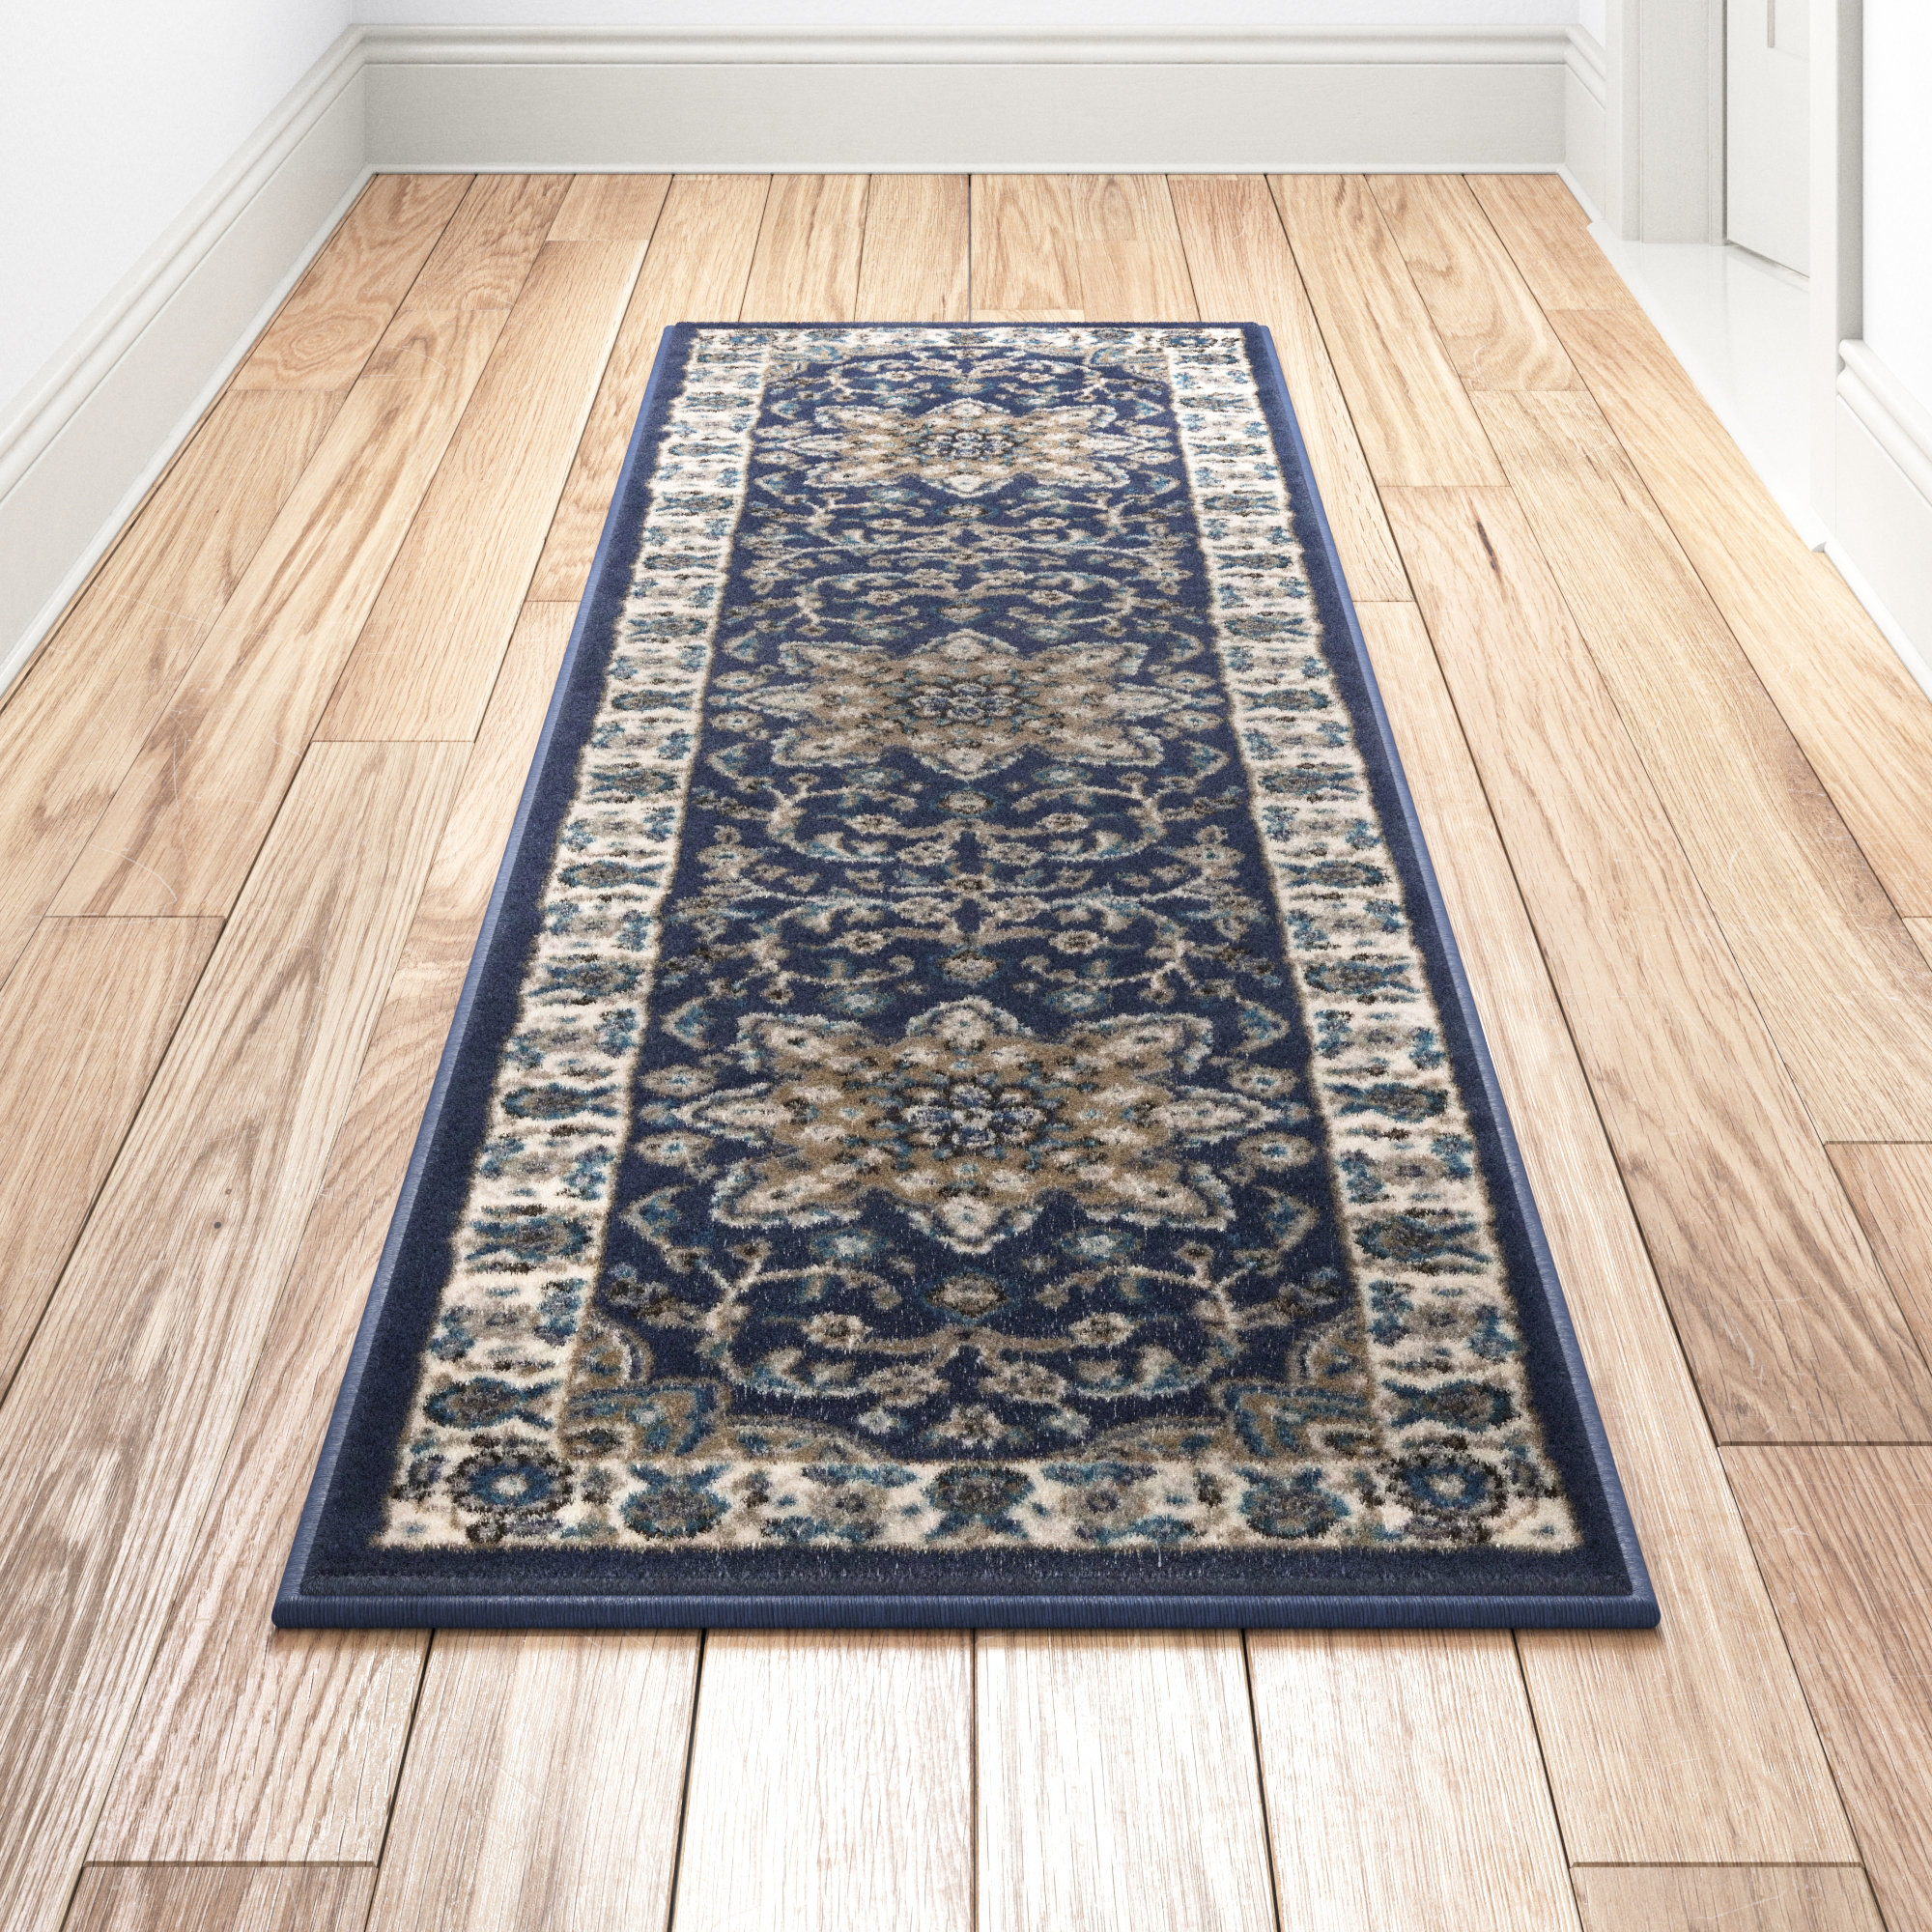 Beverly Rug Diego Solid Gray 20 in. x 59 in. Non-Slip Rubber Back Runner Rug